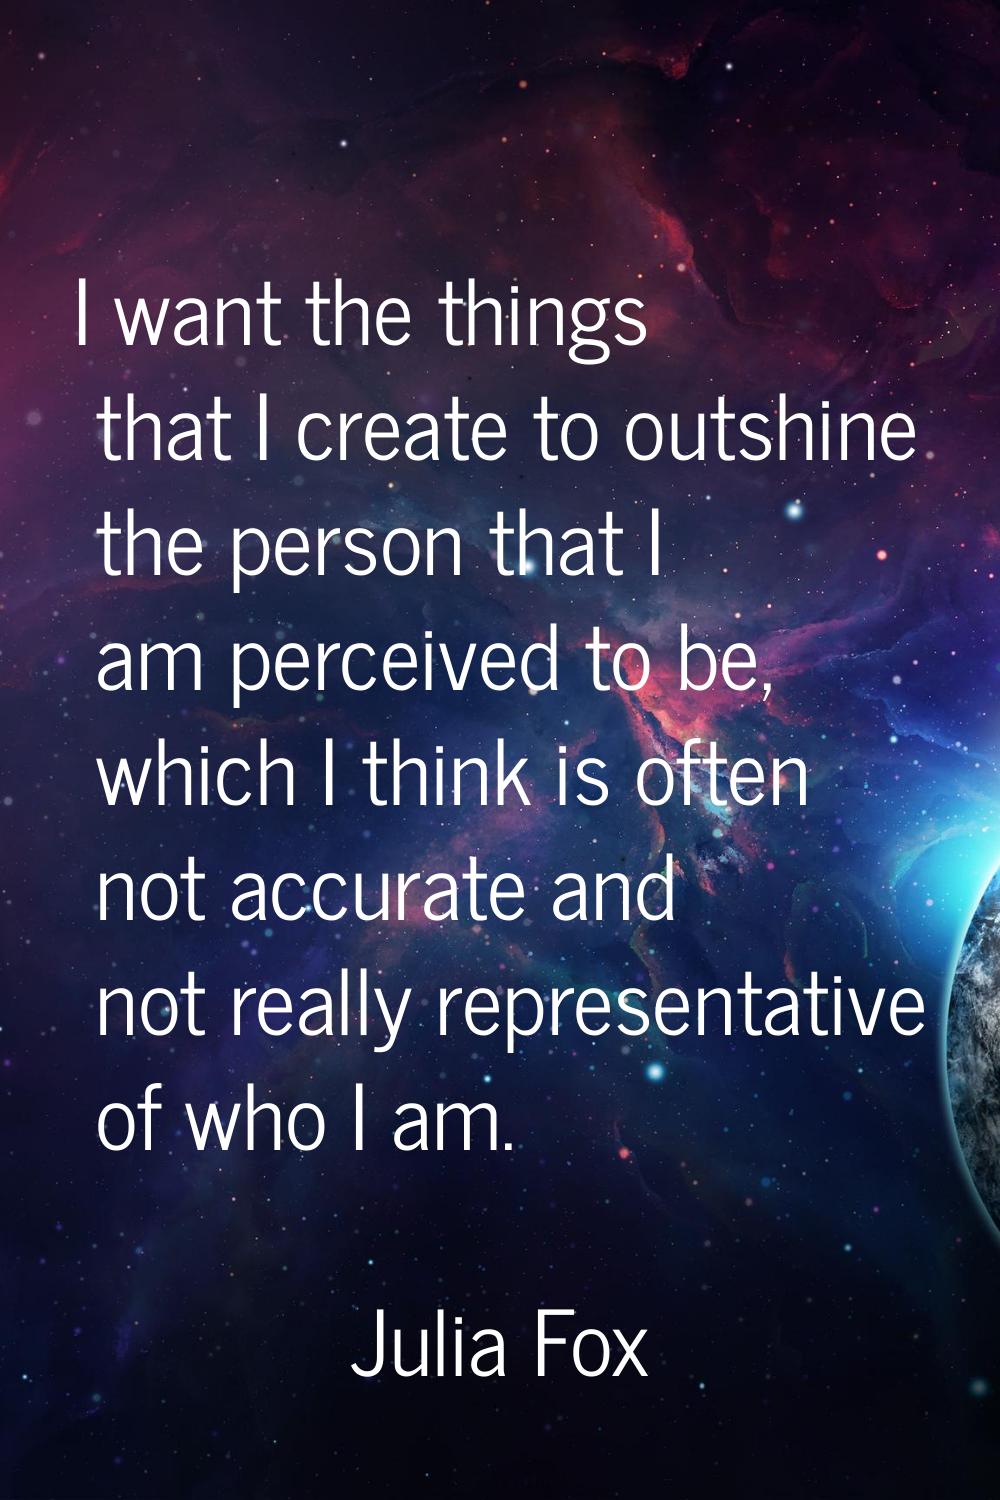 I want the things that I create to outshine the person that I am perceived to be, which I think is 